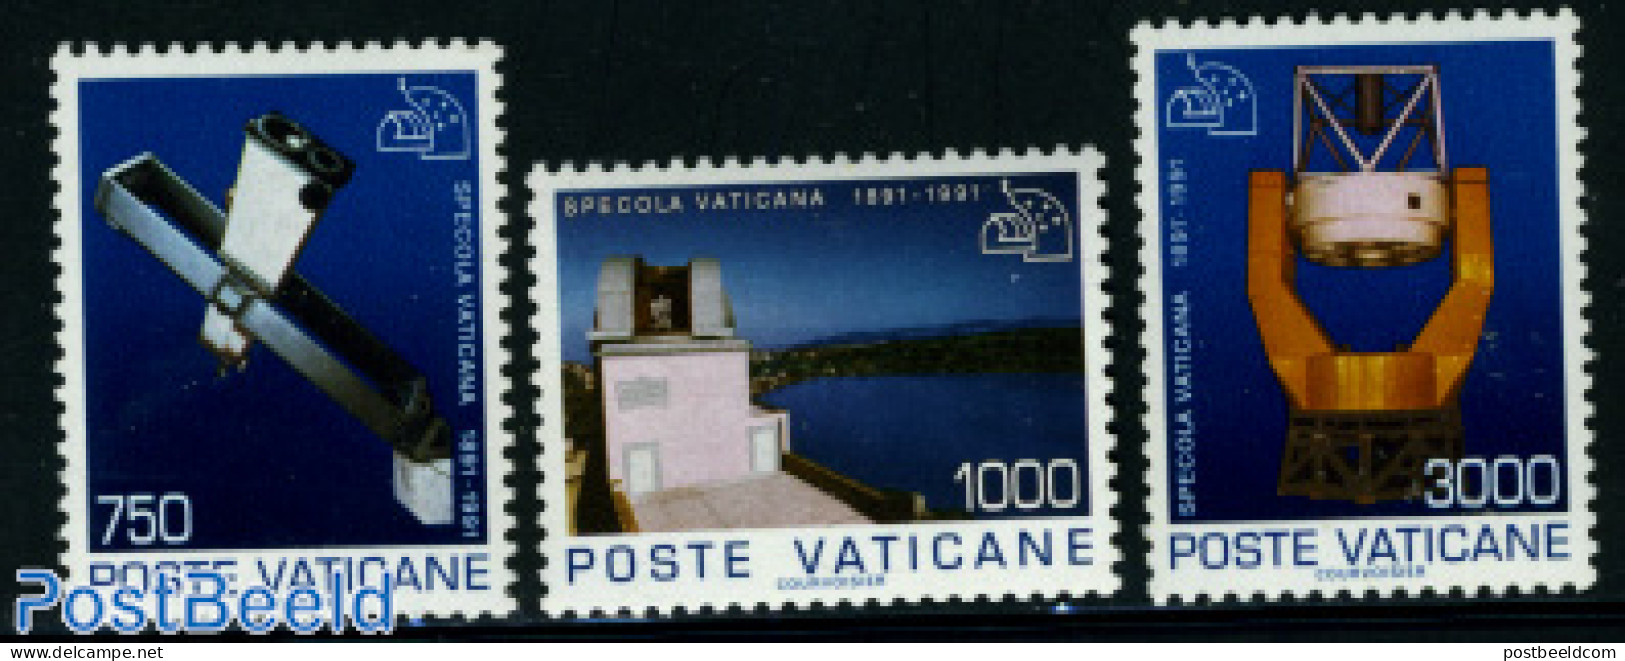 Vatican 1991 Specola Vaticana 3v, Mint NH, Science - Astronomy - Unused Stamps